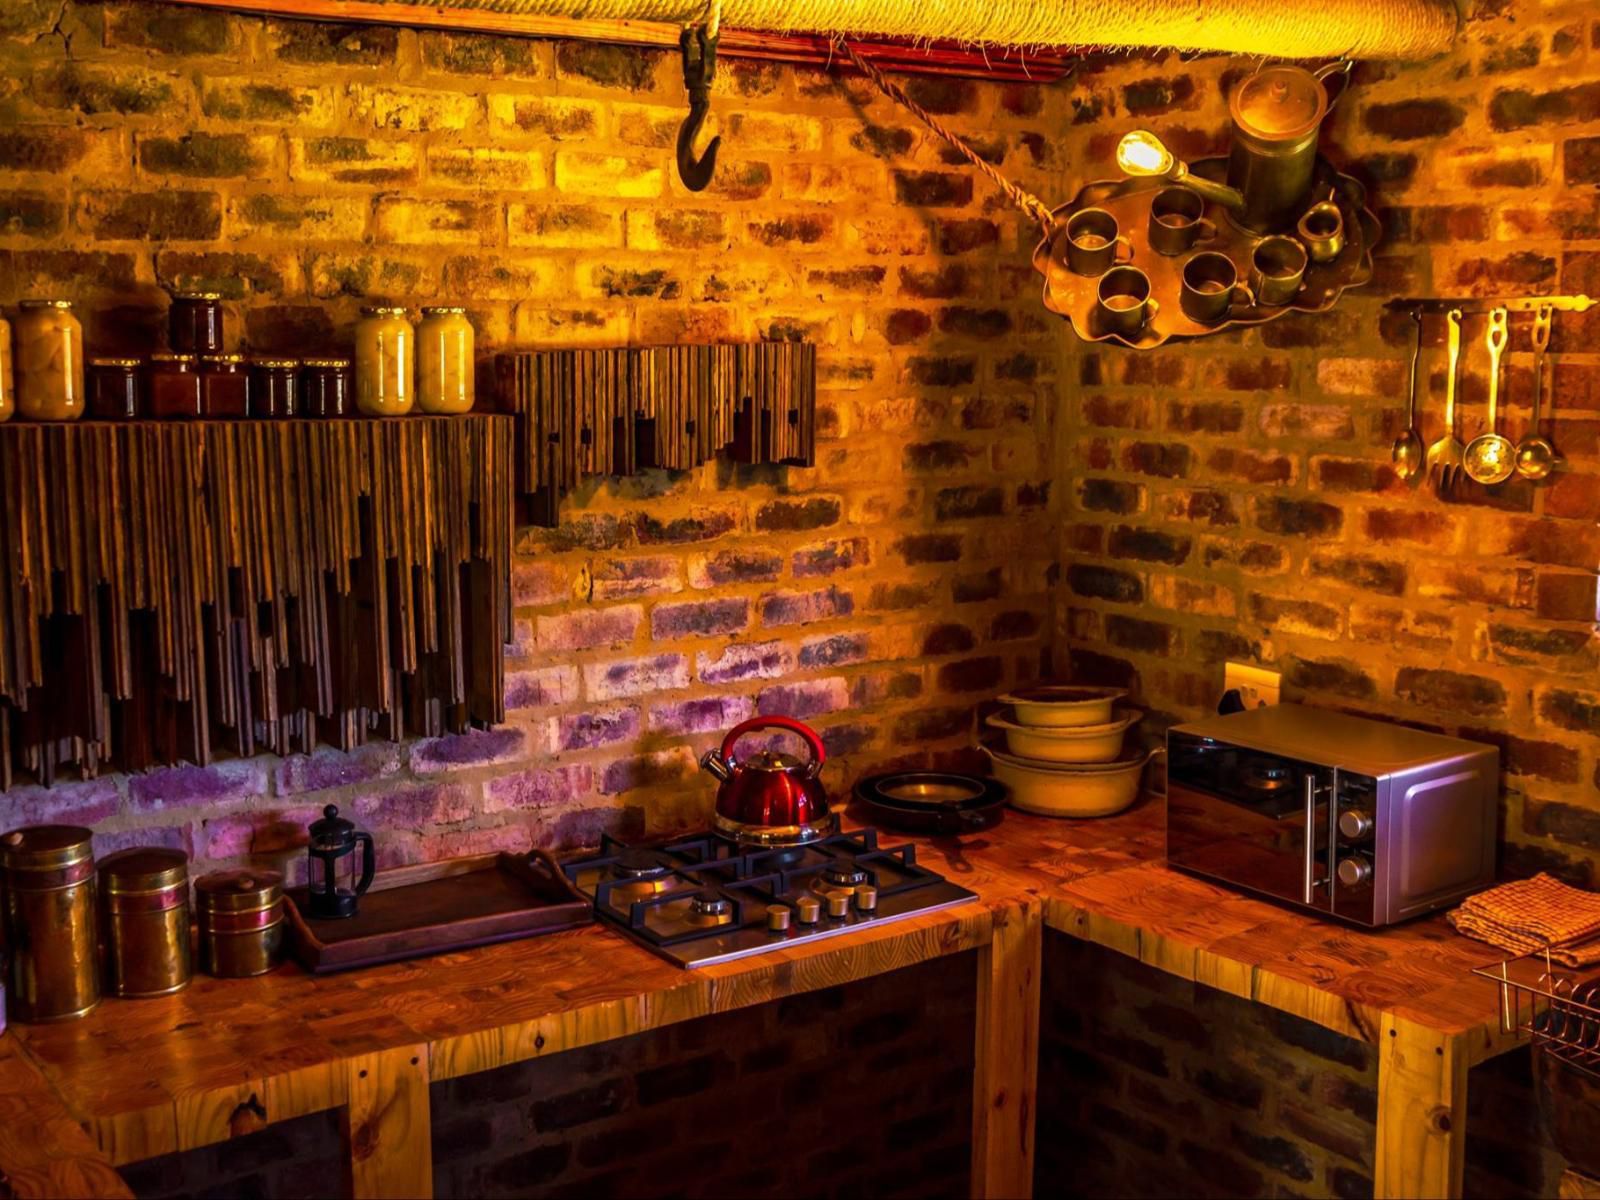 The Ancient Copper Shed Potchefstroom North West Province South Africa Colorful, Bar